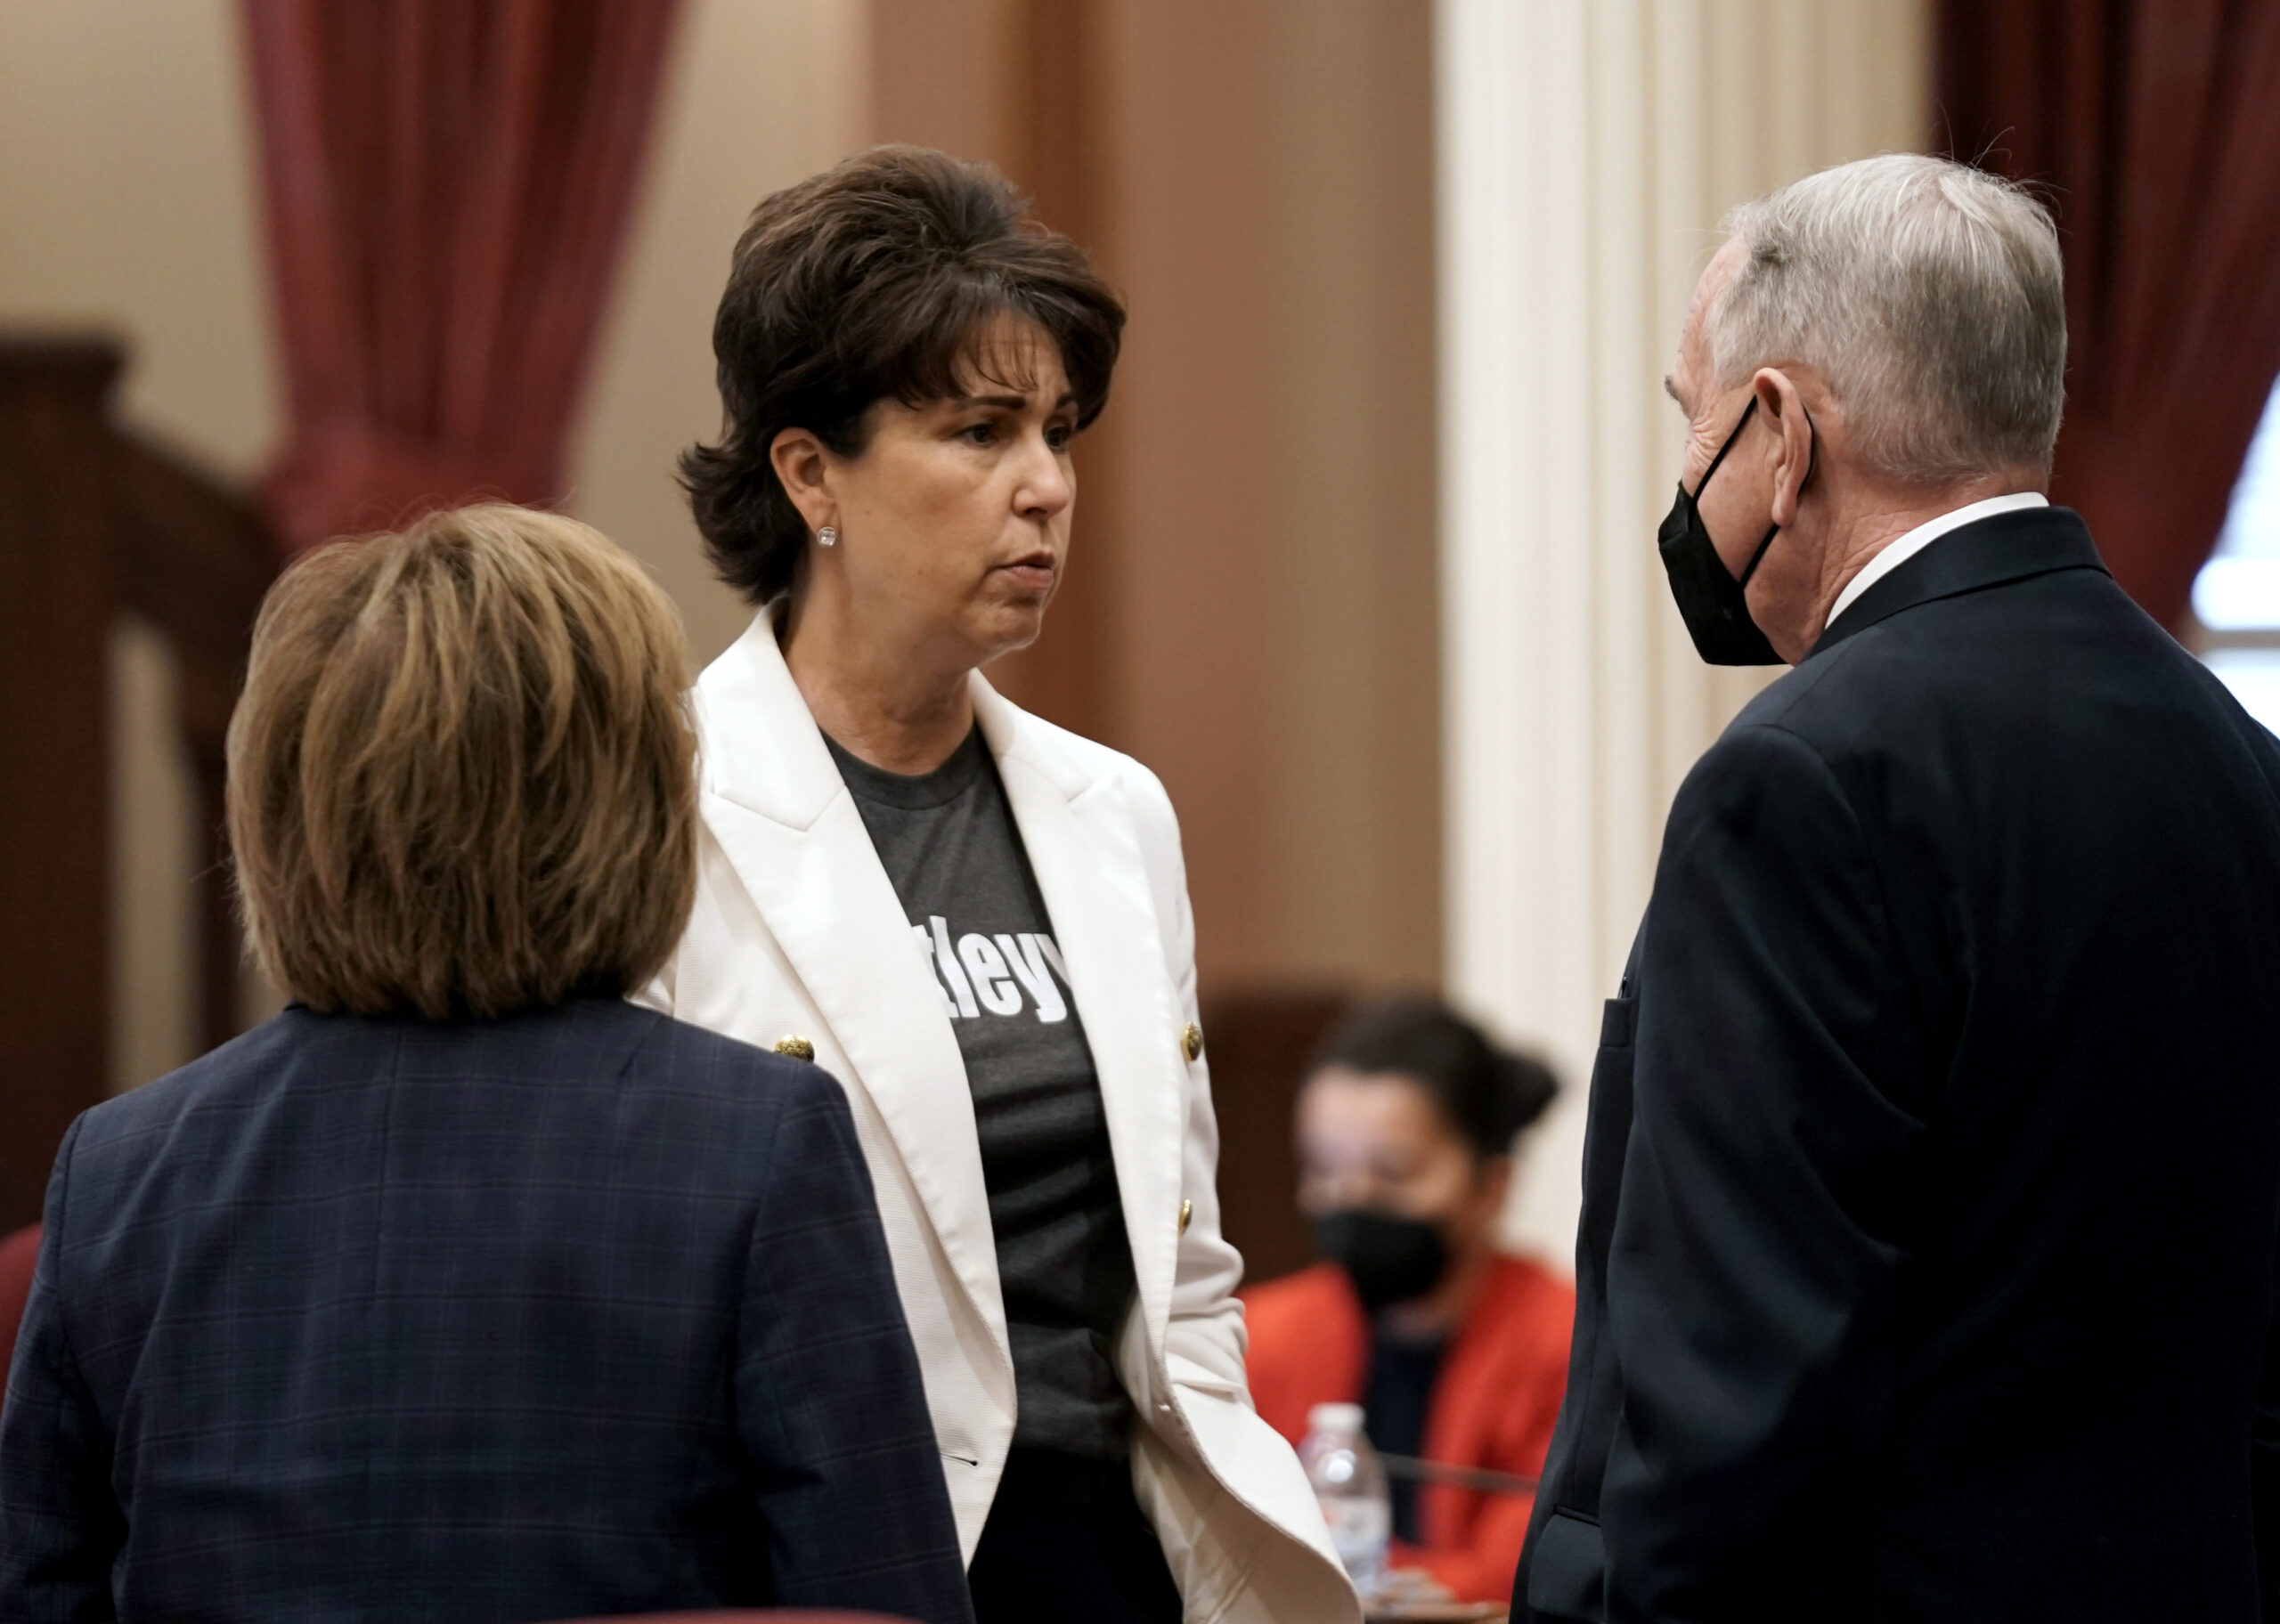 State Sen. Connie Leya, D-Chino, center, talks with fellow Democratic state Senators, Maria Elena Durazo, of Los Angeles, left and Richard Roth, of Riverside, at the Capitol in Sacramento, Calif., Wednesday, Aug. 31, 2022. On Wednesday, California lawmakers, approved Leyva's bill to make vasectomies cheaper for men. (AP Photo/Rich Pedroncelli)